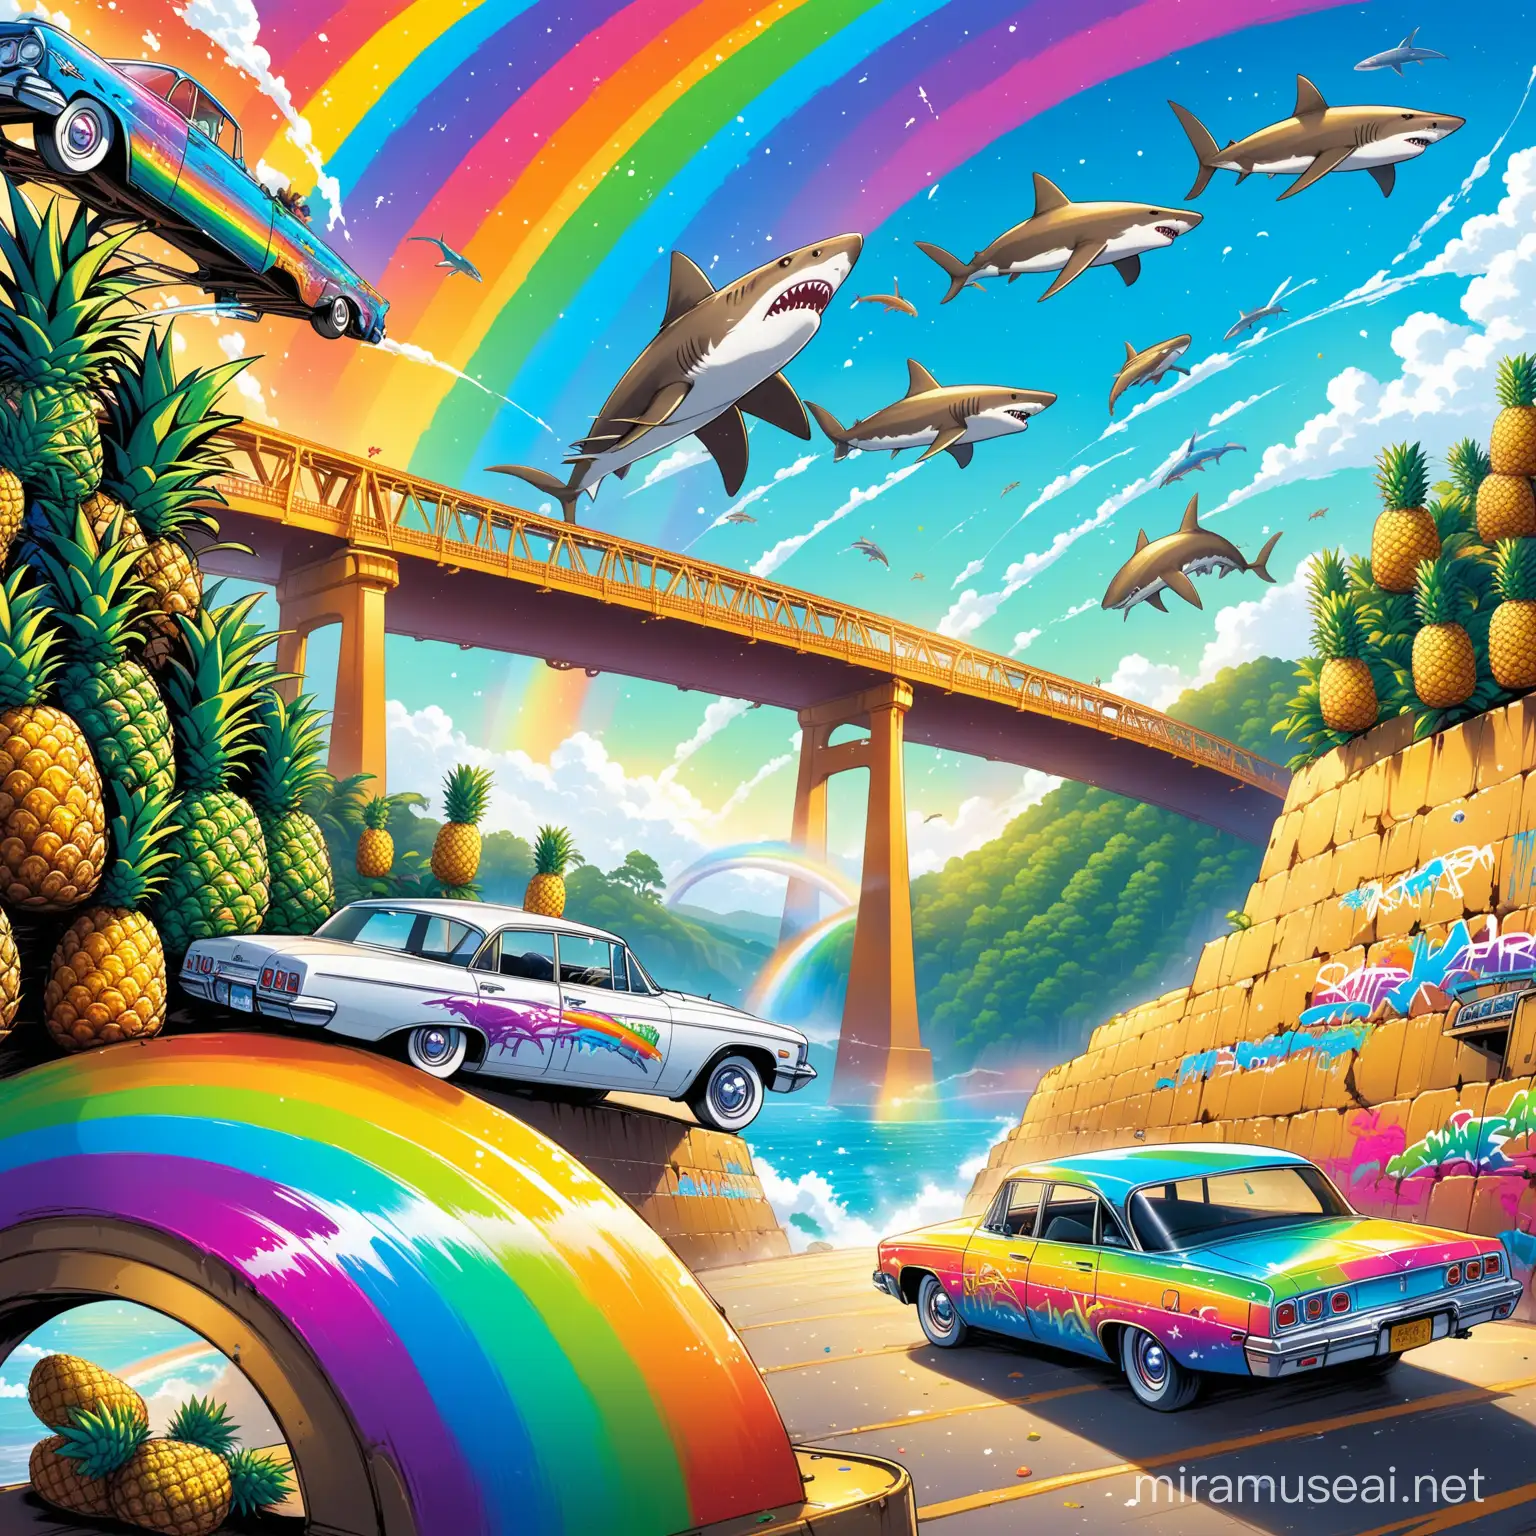 Flying Sharks Over Golden Bridge with Rainbow and Skateboarder